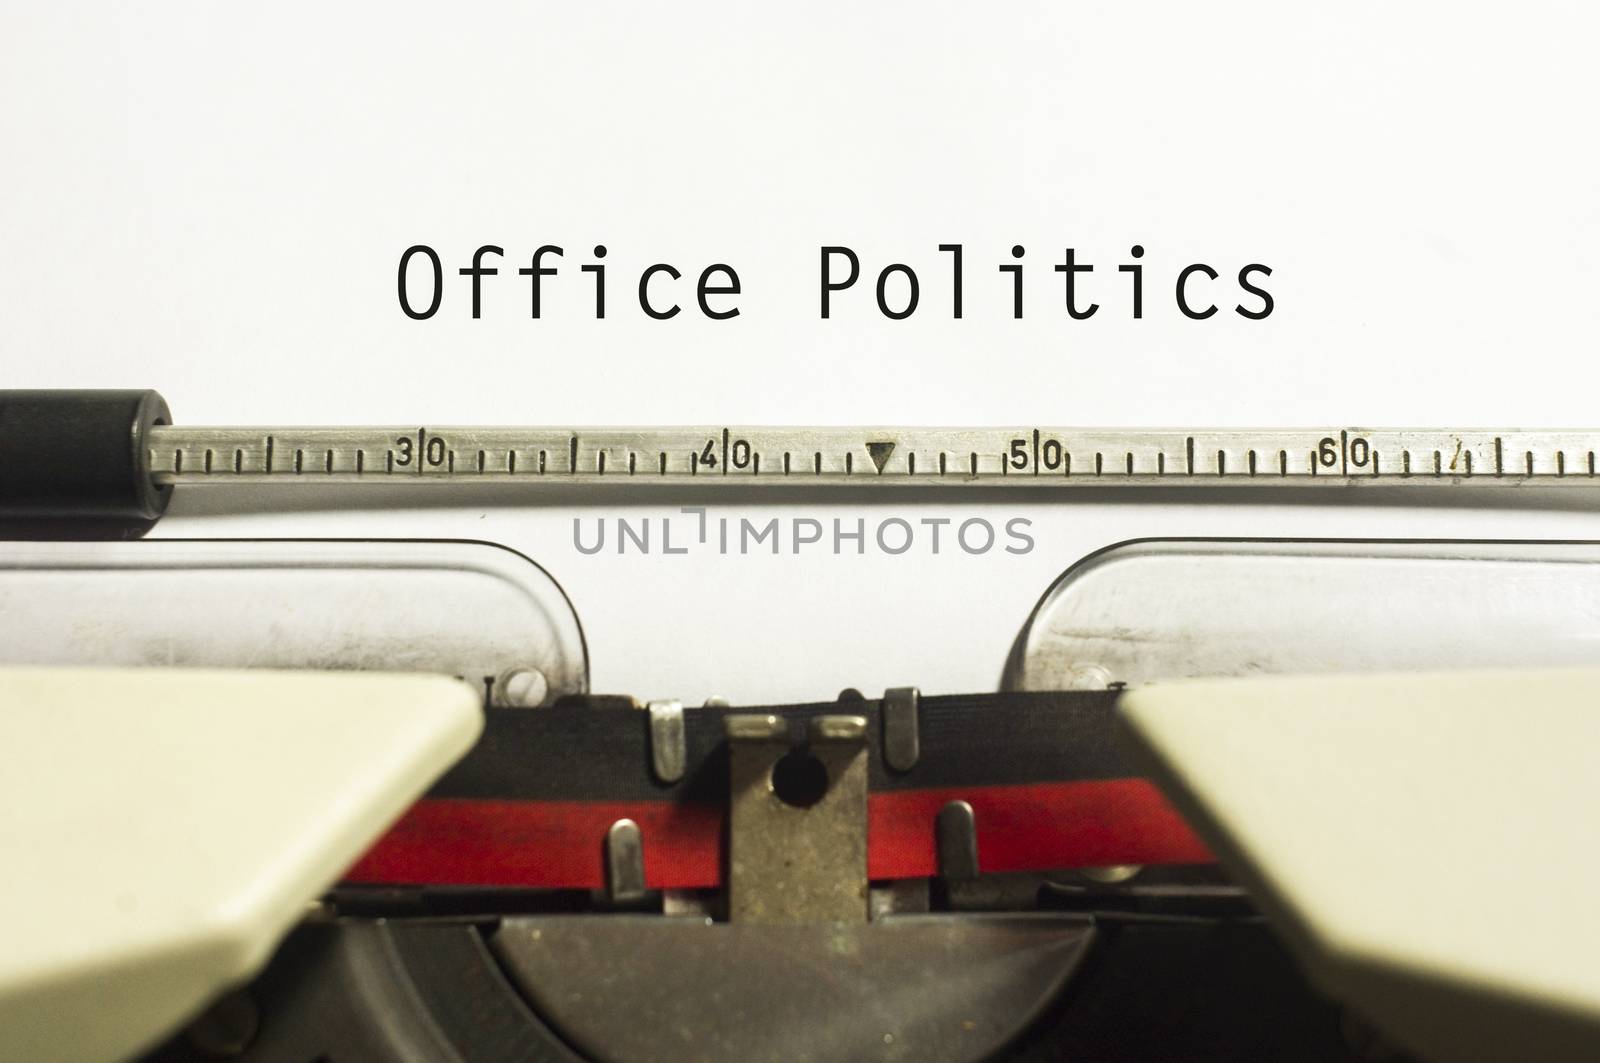 office politics, message on typewriter for conceptual background.